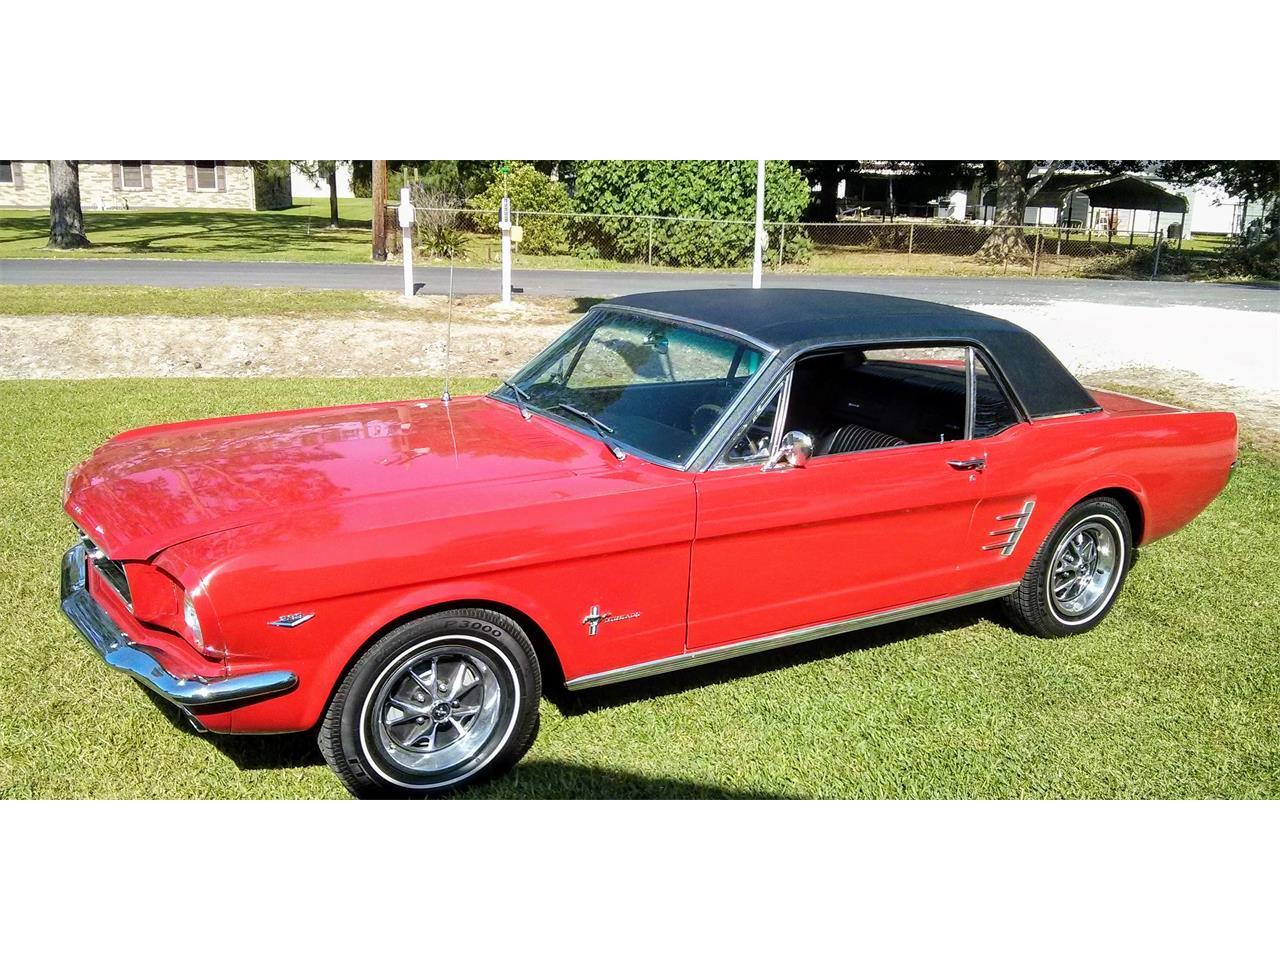 For Sale: 1966 Ford Mustang in Lake Charles , Louisiana for sale in Lake Charles, LA